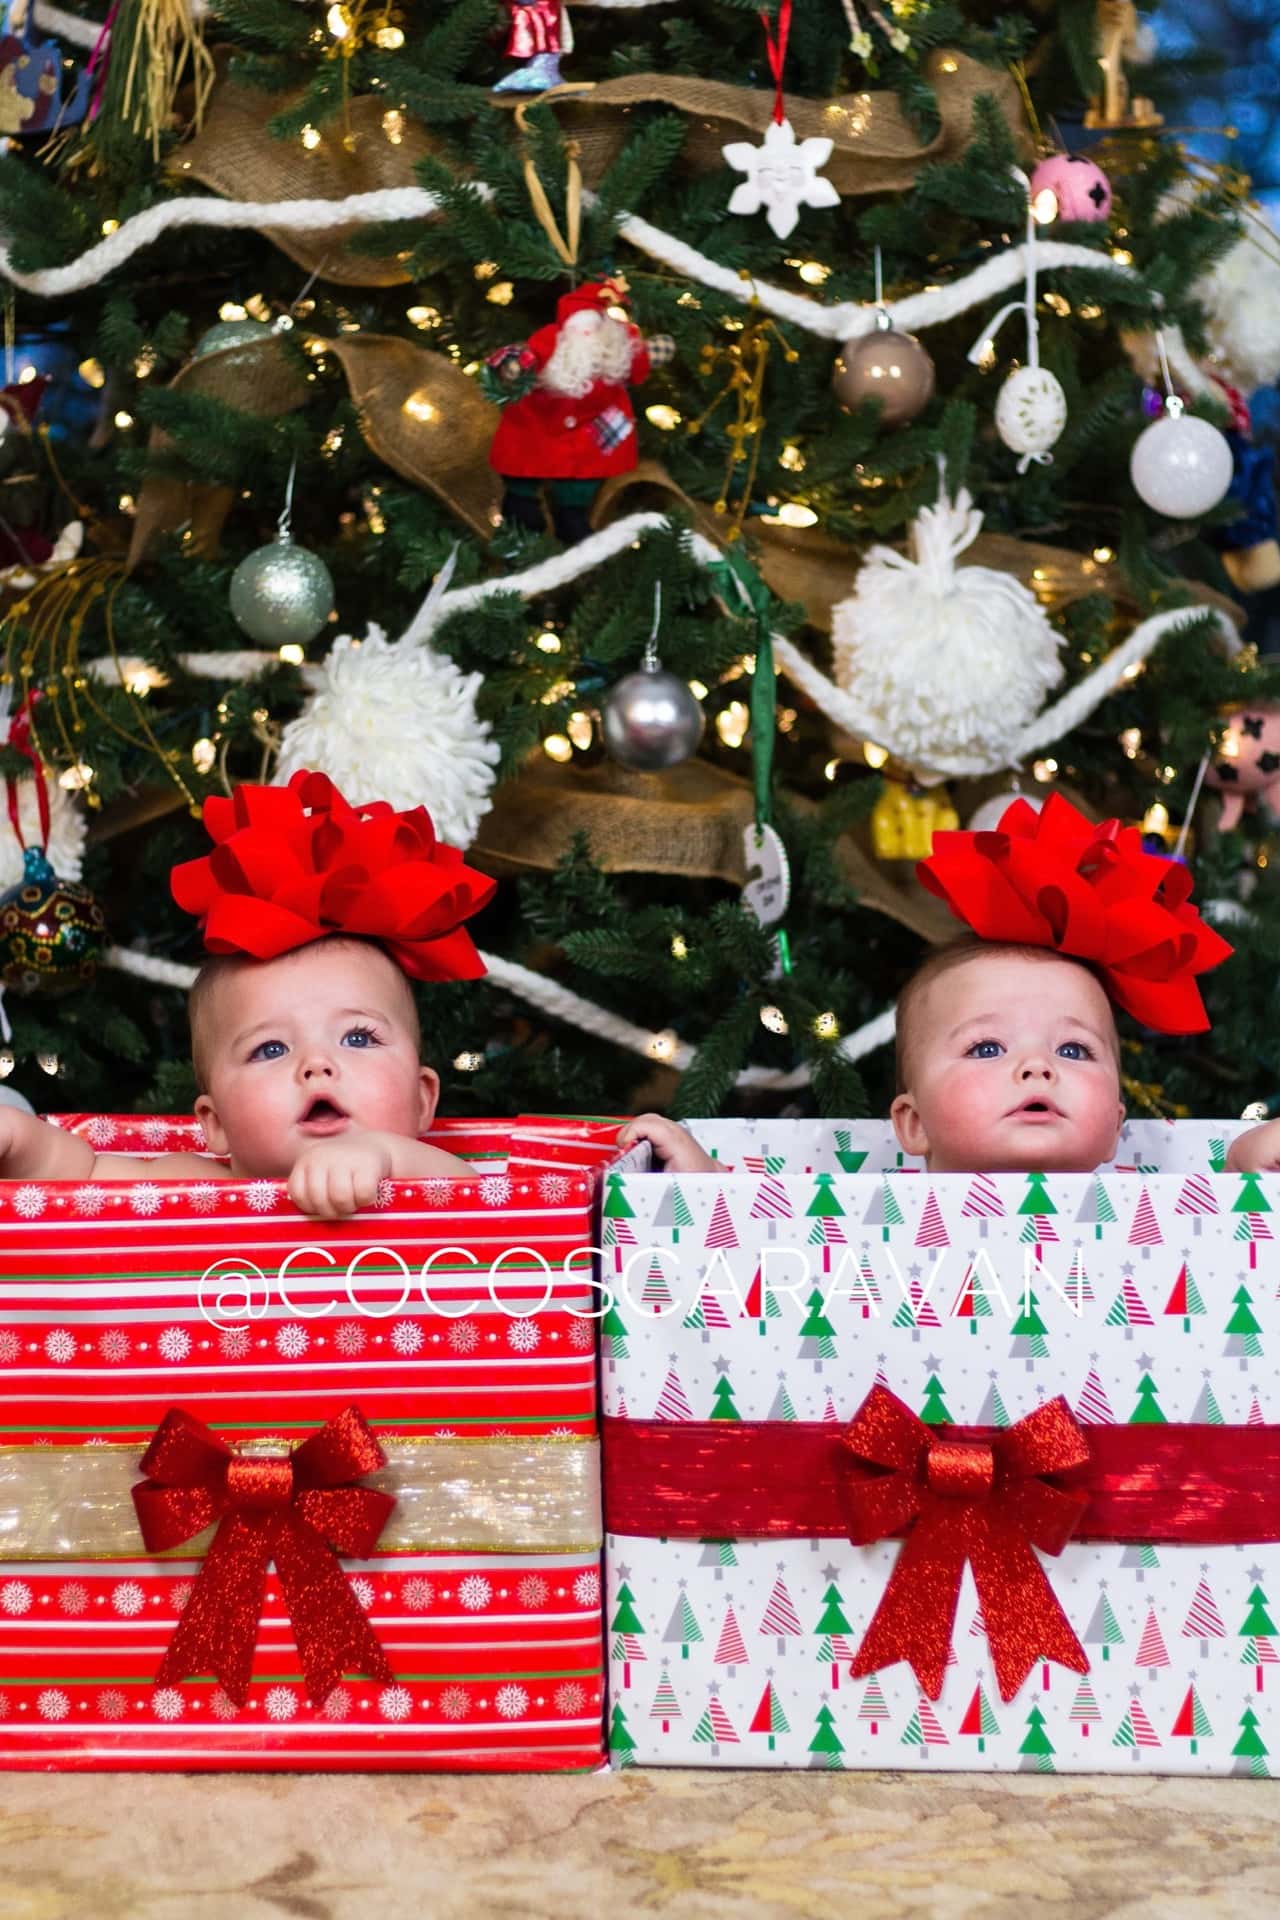 Twin babies with bows on their head sitting in boxes wrapped as presents in front of the Christmas tree.